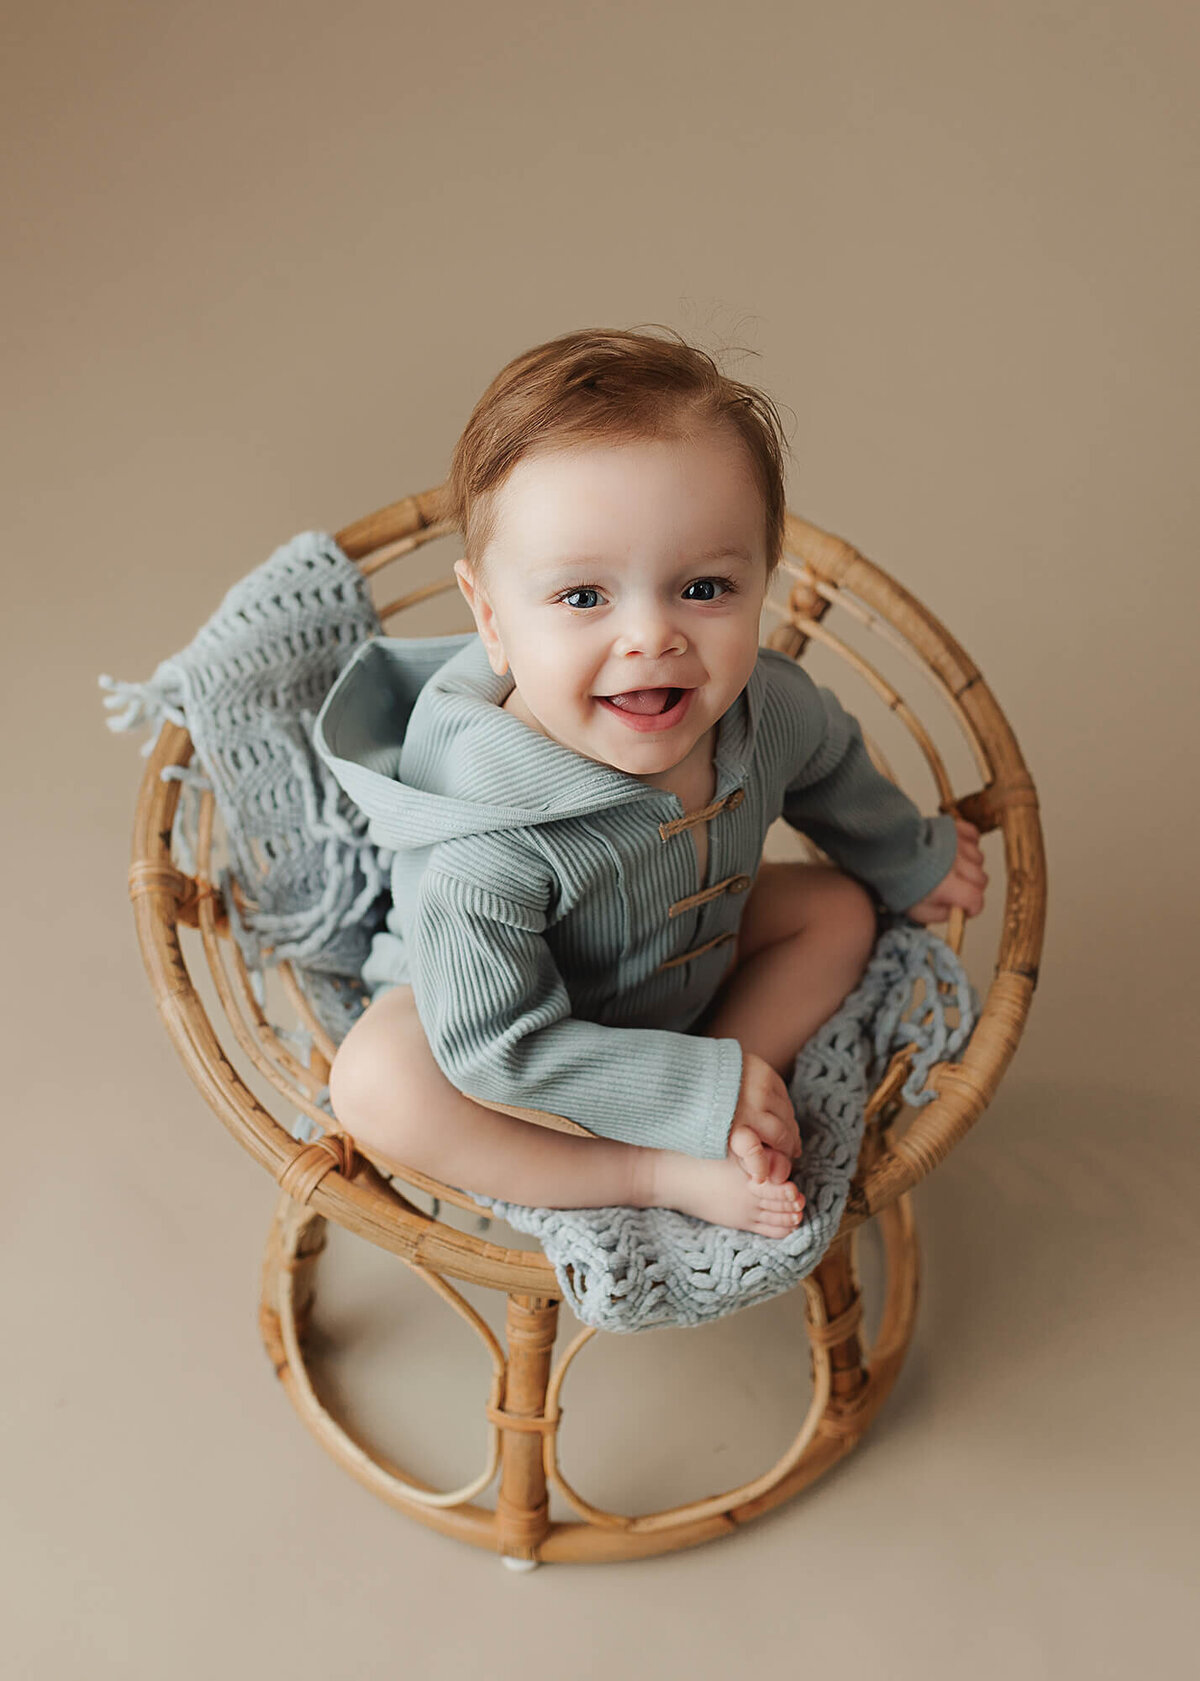 Baby boy smiles for his milestone session at Jennifer Brandes Photography studio.